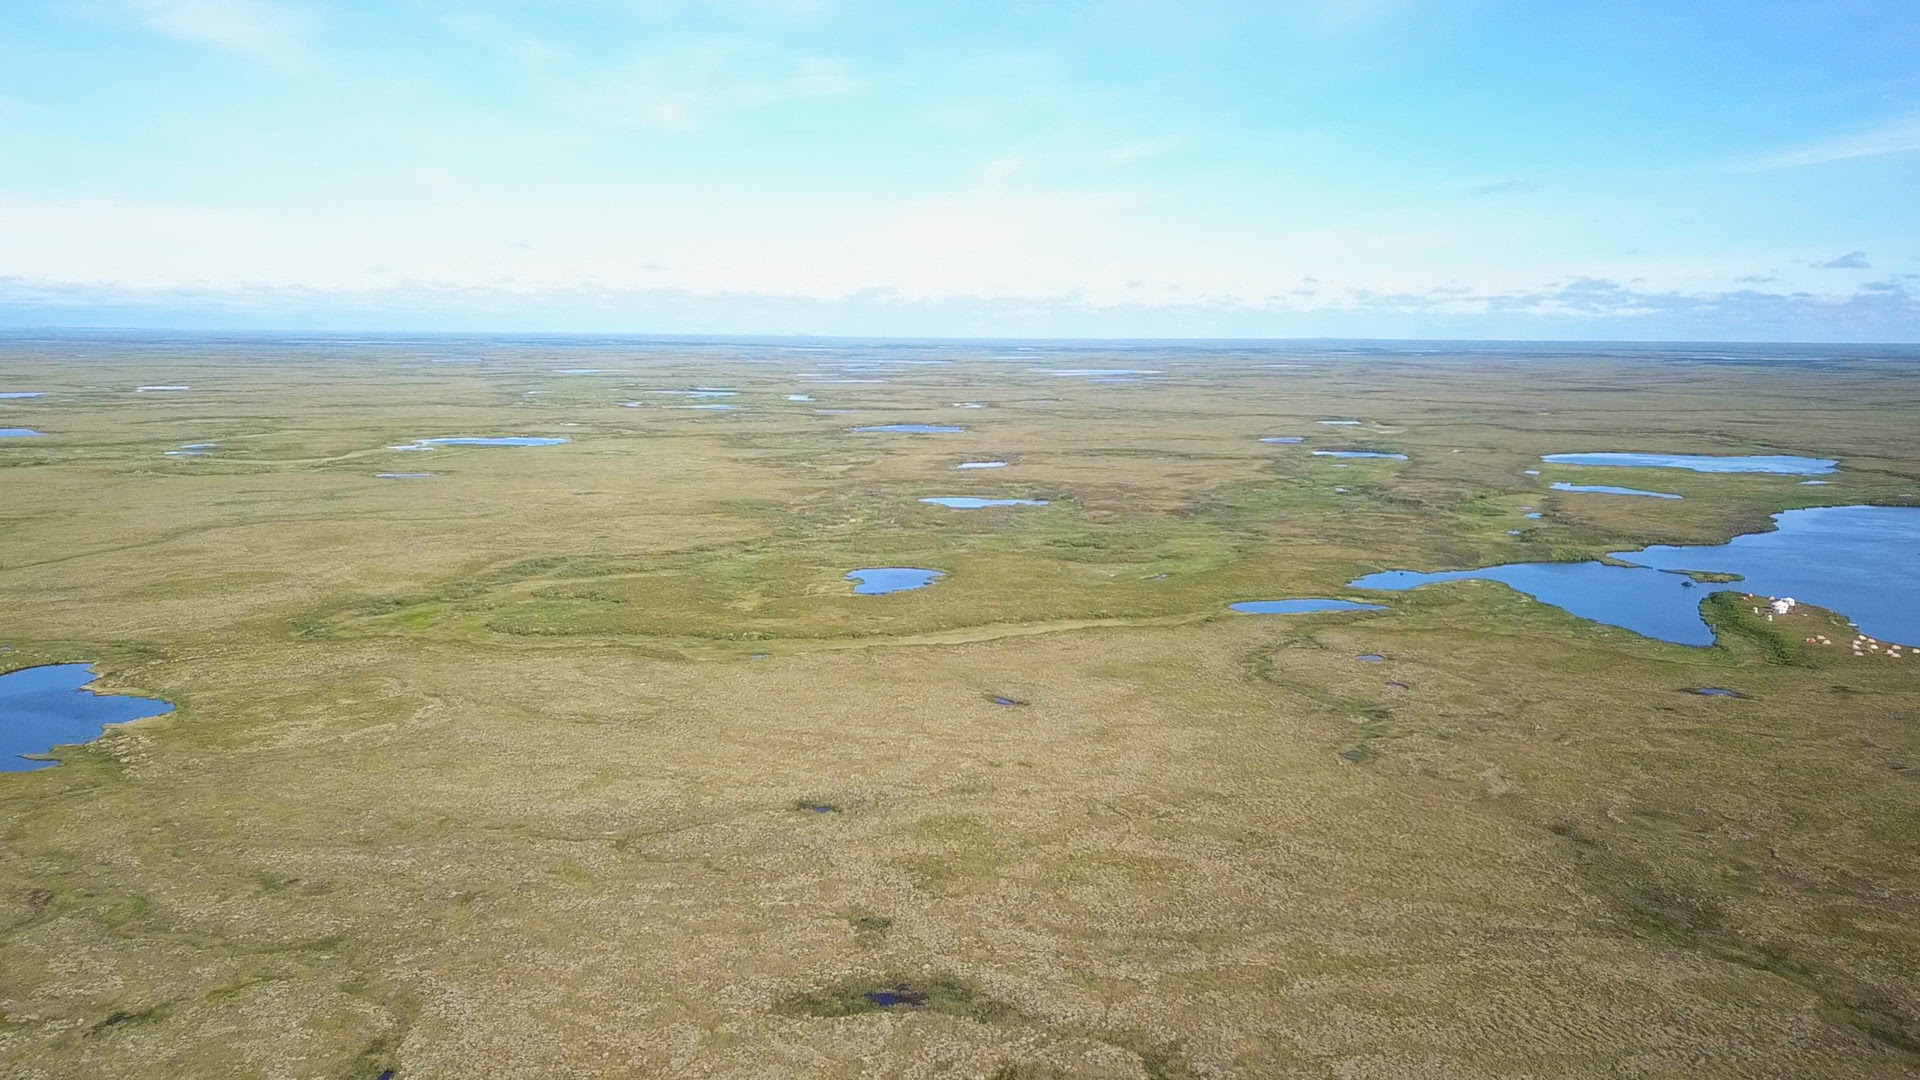 As the permafrost thaws, the landscape above it changes.